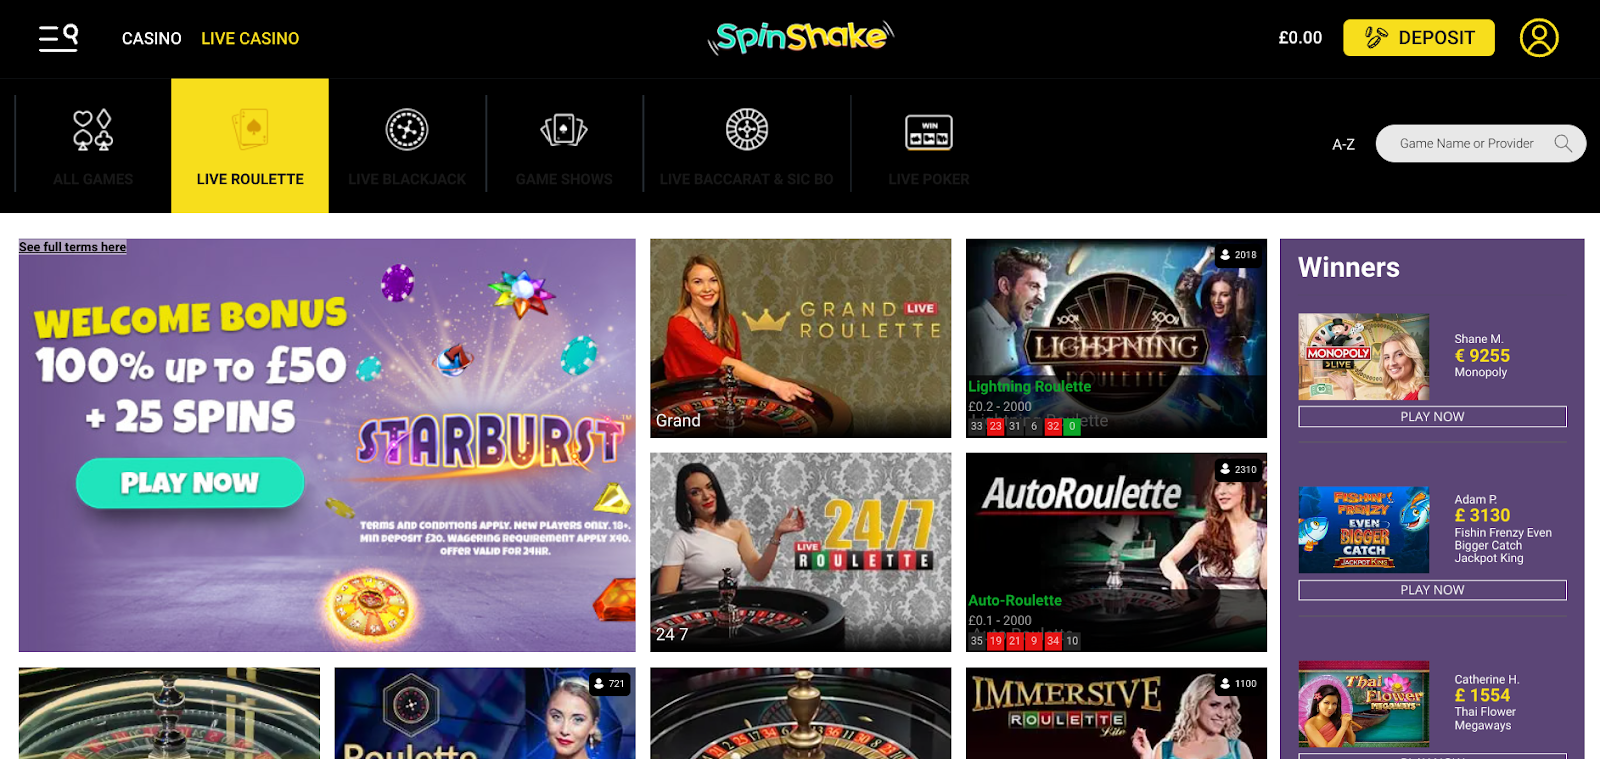 Roulette at Spin Shake Casino